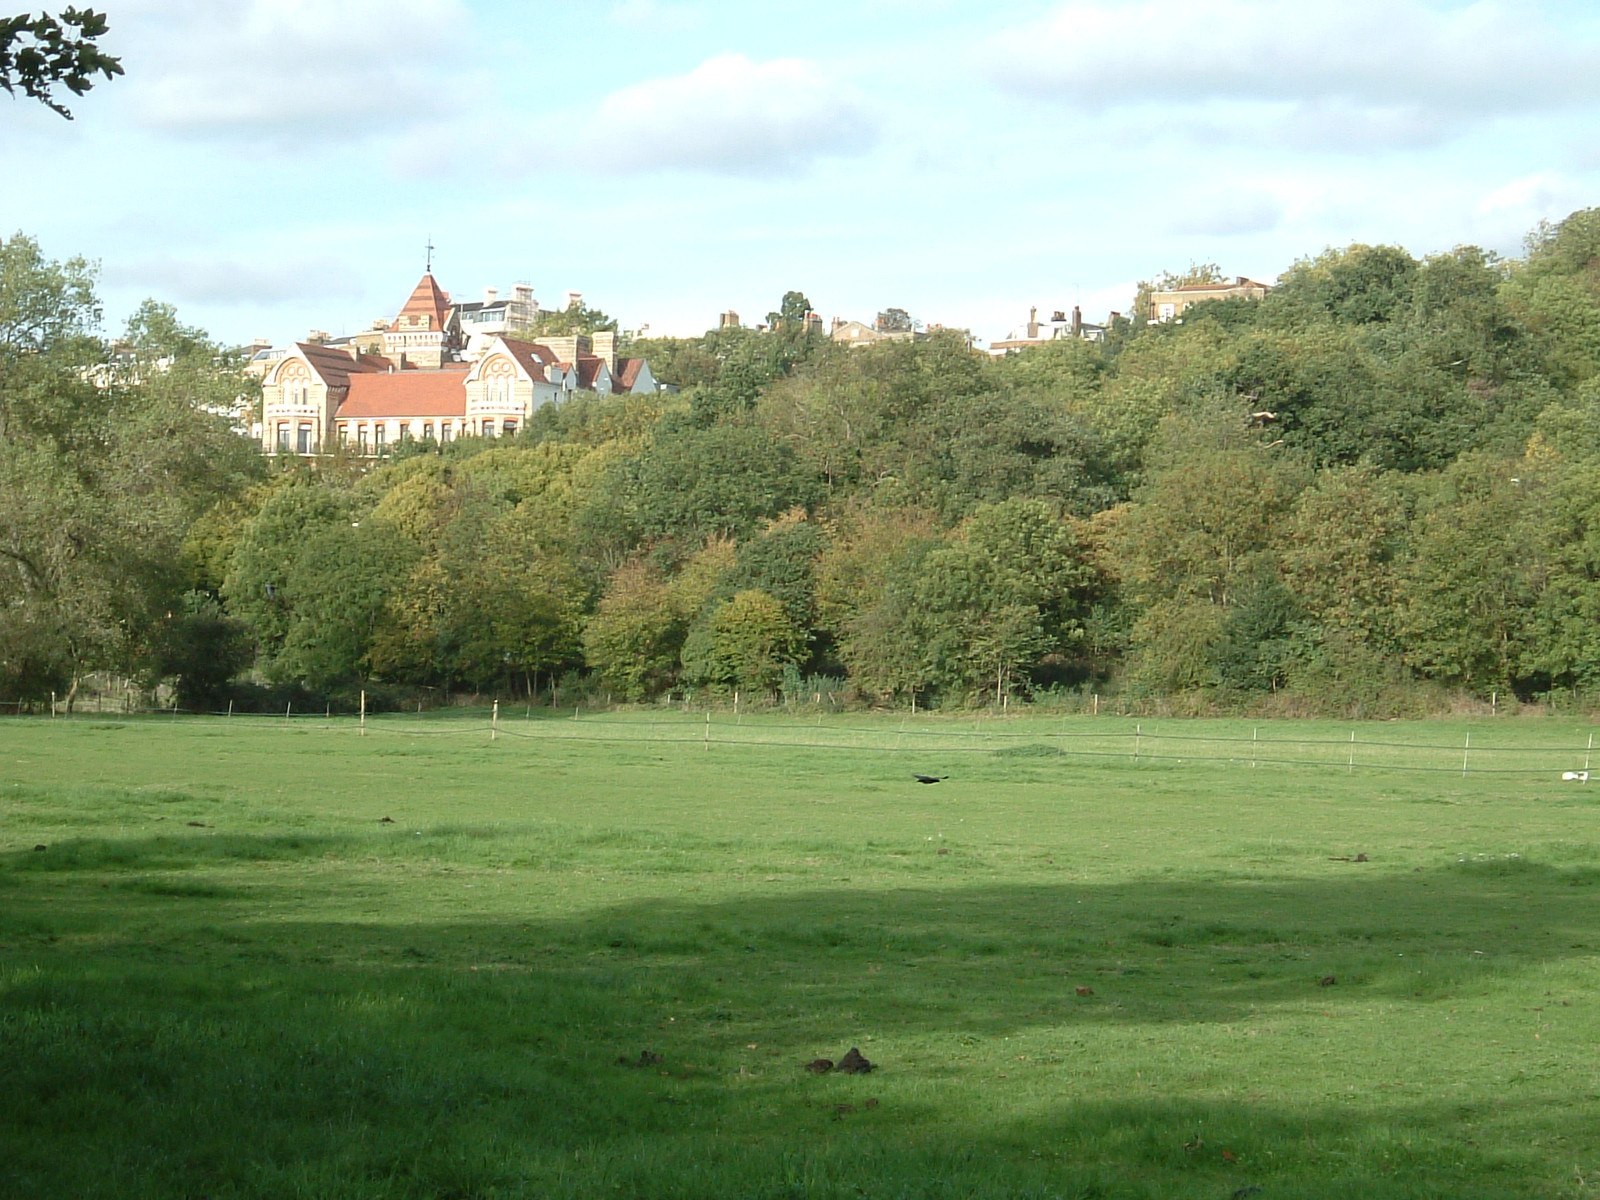 The view towards the Star and Garter Home from the Capital Ring at Petersham Meadow